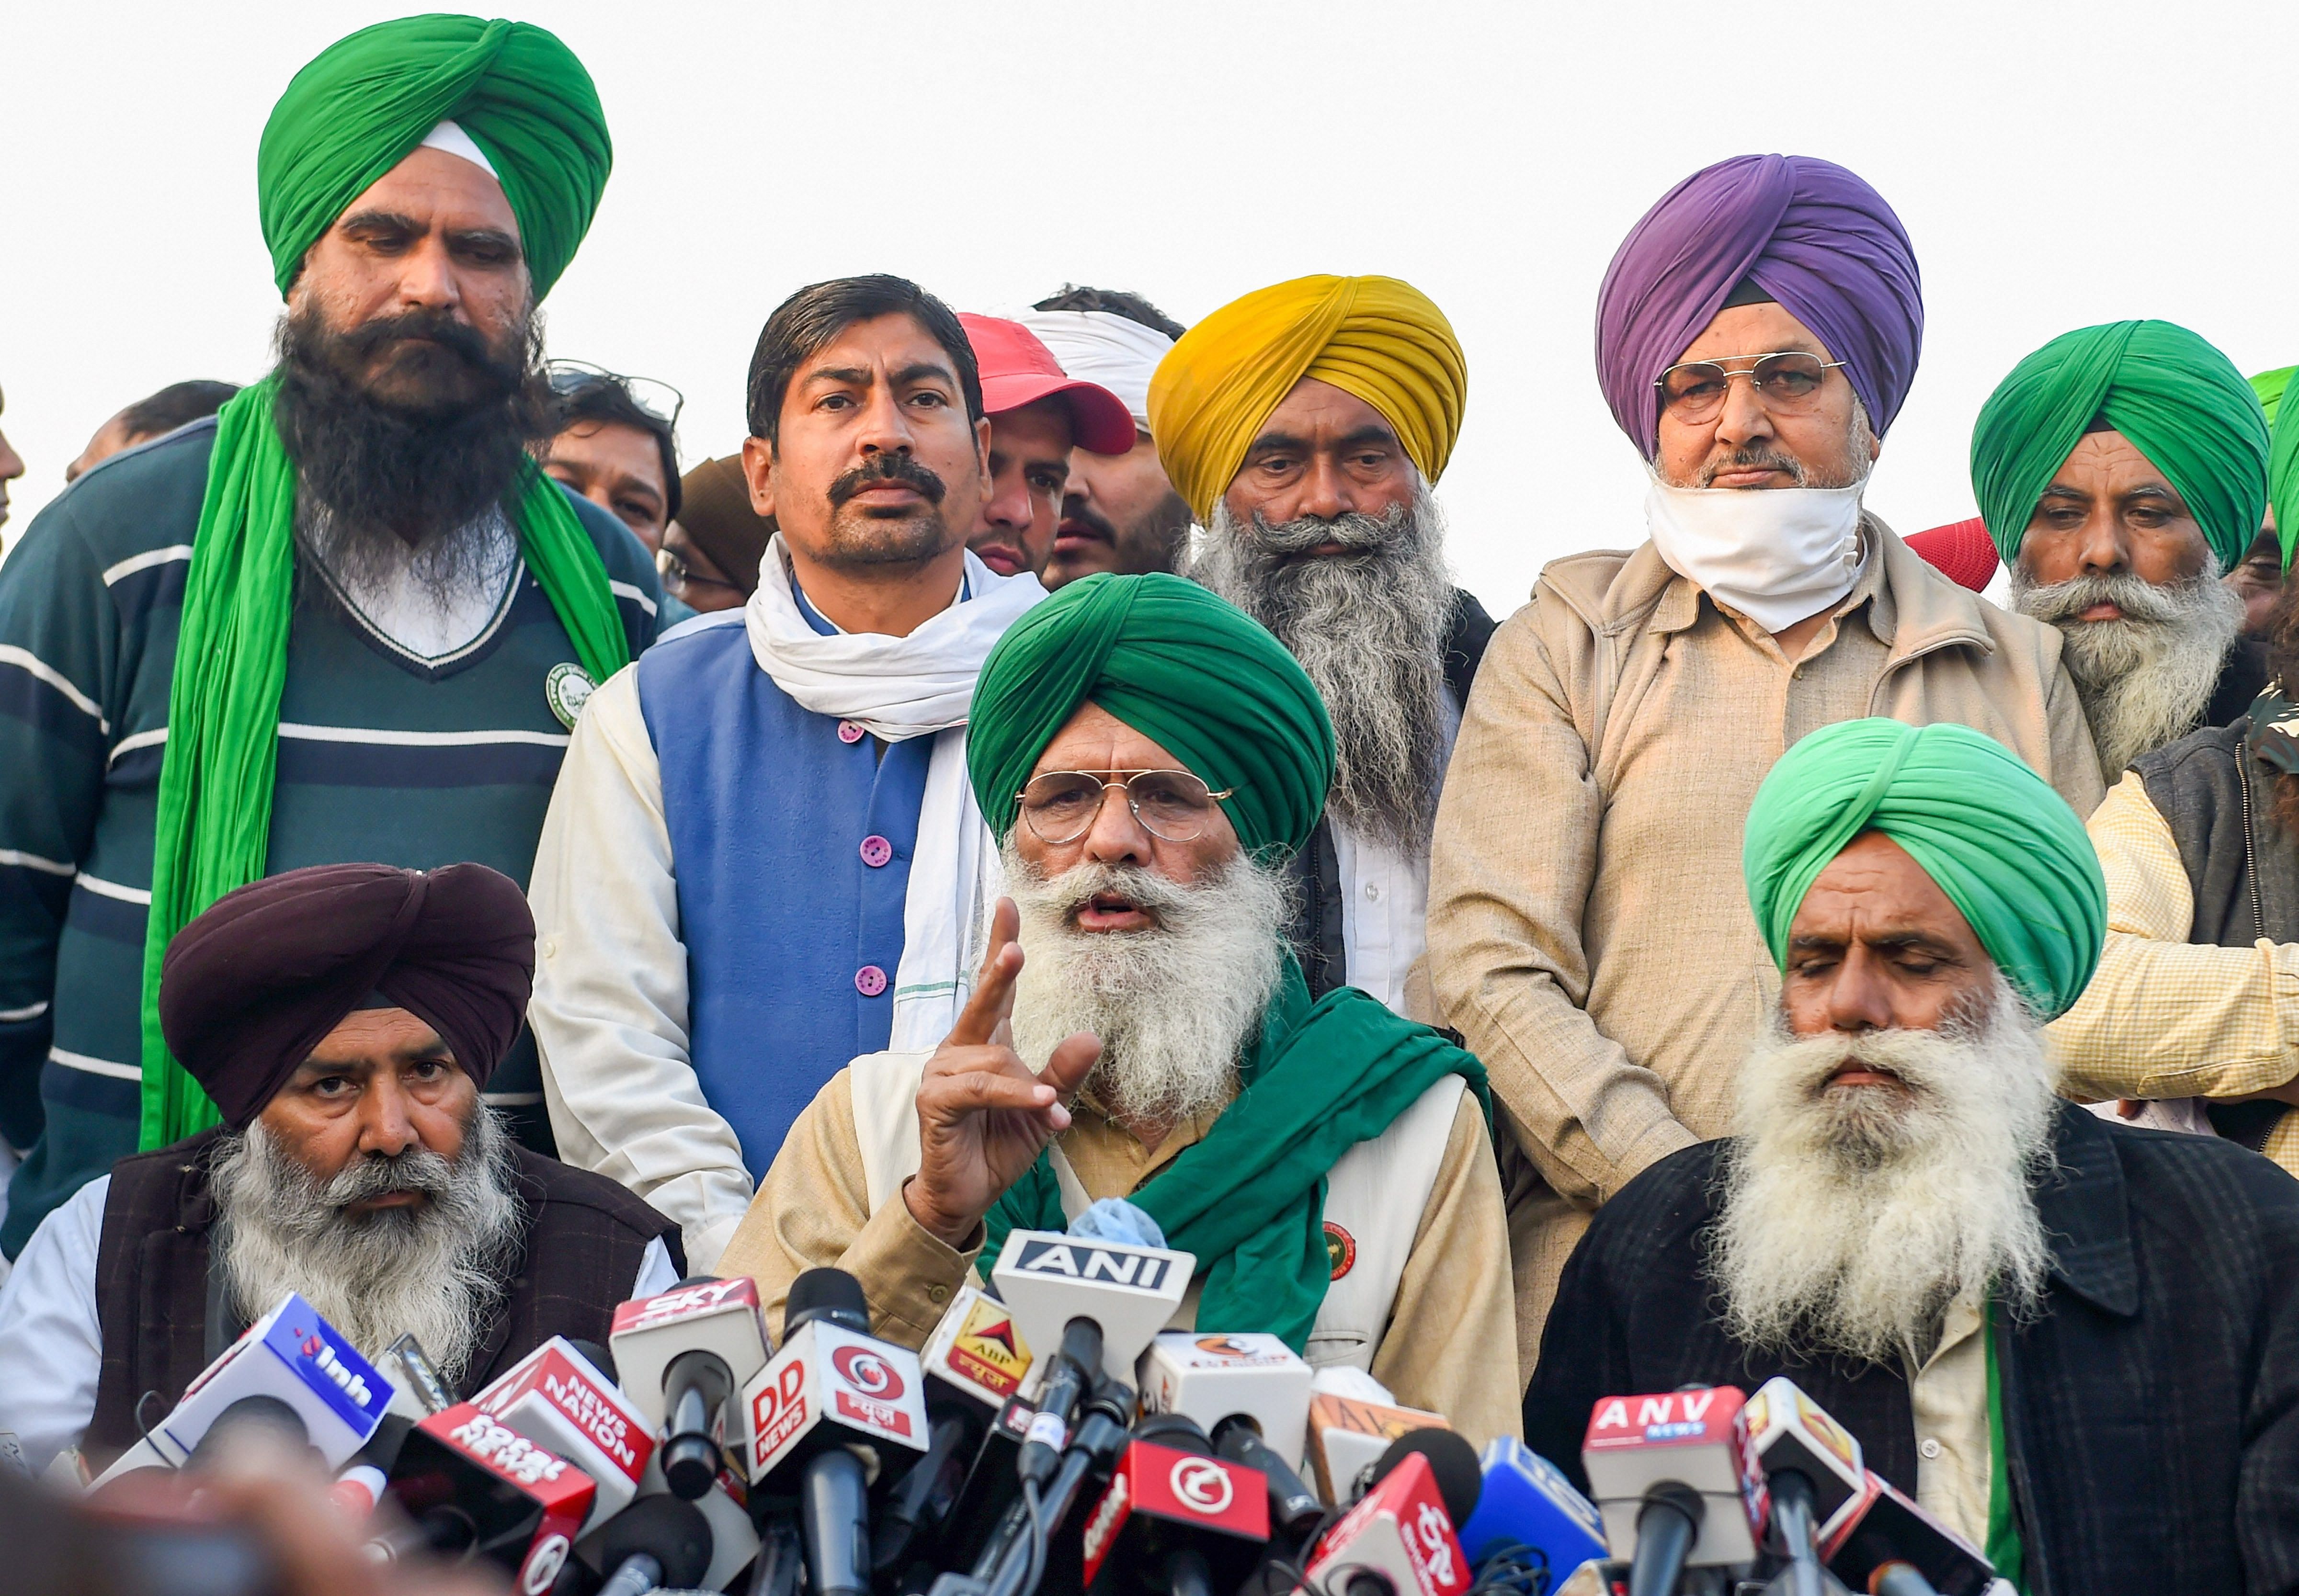  Leaders of various farmer unions address the media at Singhu border, during their 'Delhi Chalo' march against the Centre's farm reform laws, in New Delhi, Sunday, Nov. 29, 2020. Credit: PTI Photo